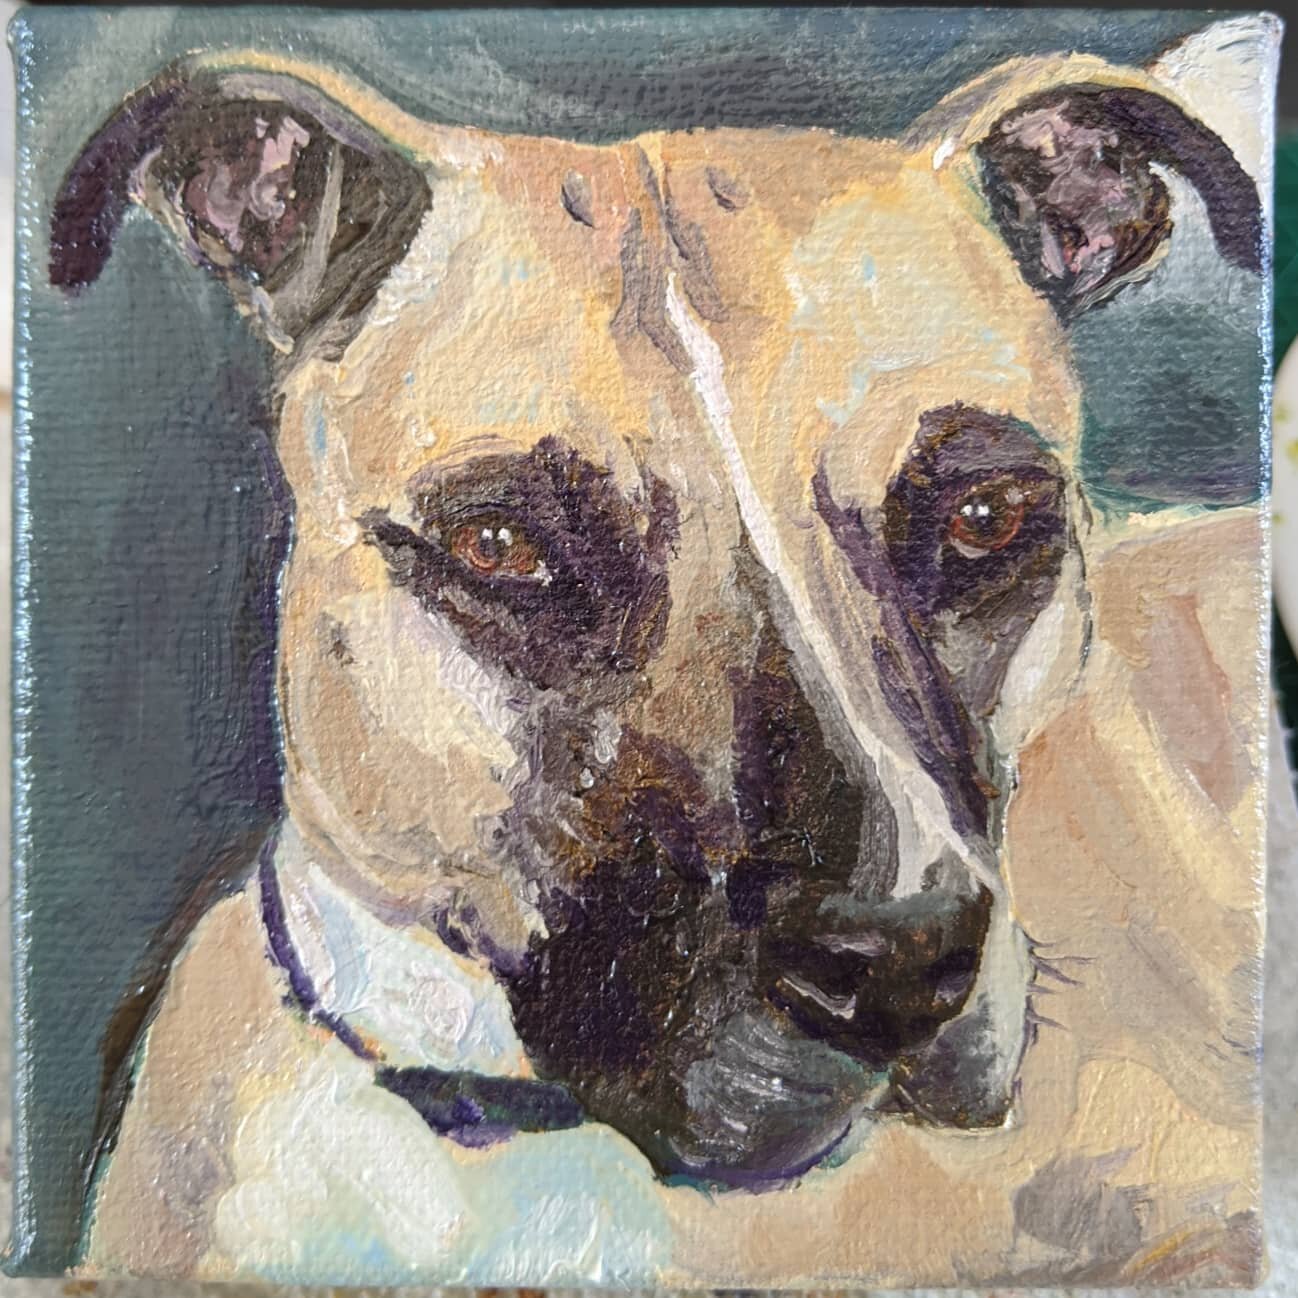 Process pictures time! Here's Lilah, a doggo commission from 2020. 4&quot;x4&quot; oils. First up is the completed portrait, then a few pictures showing how I laid out the composition and began filling her in. The second to last slide shows when I ha